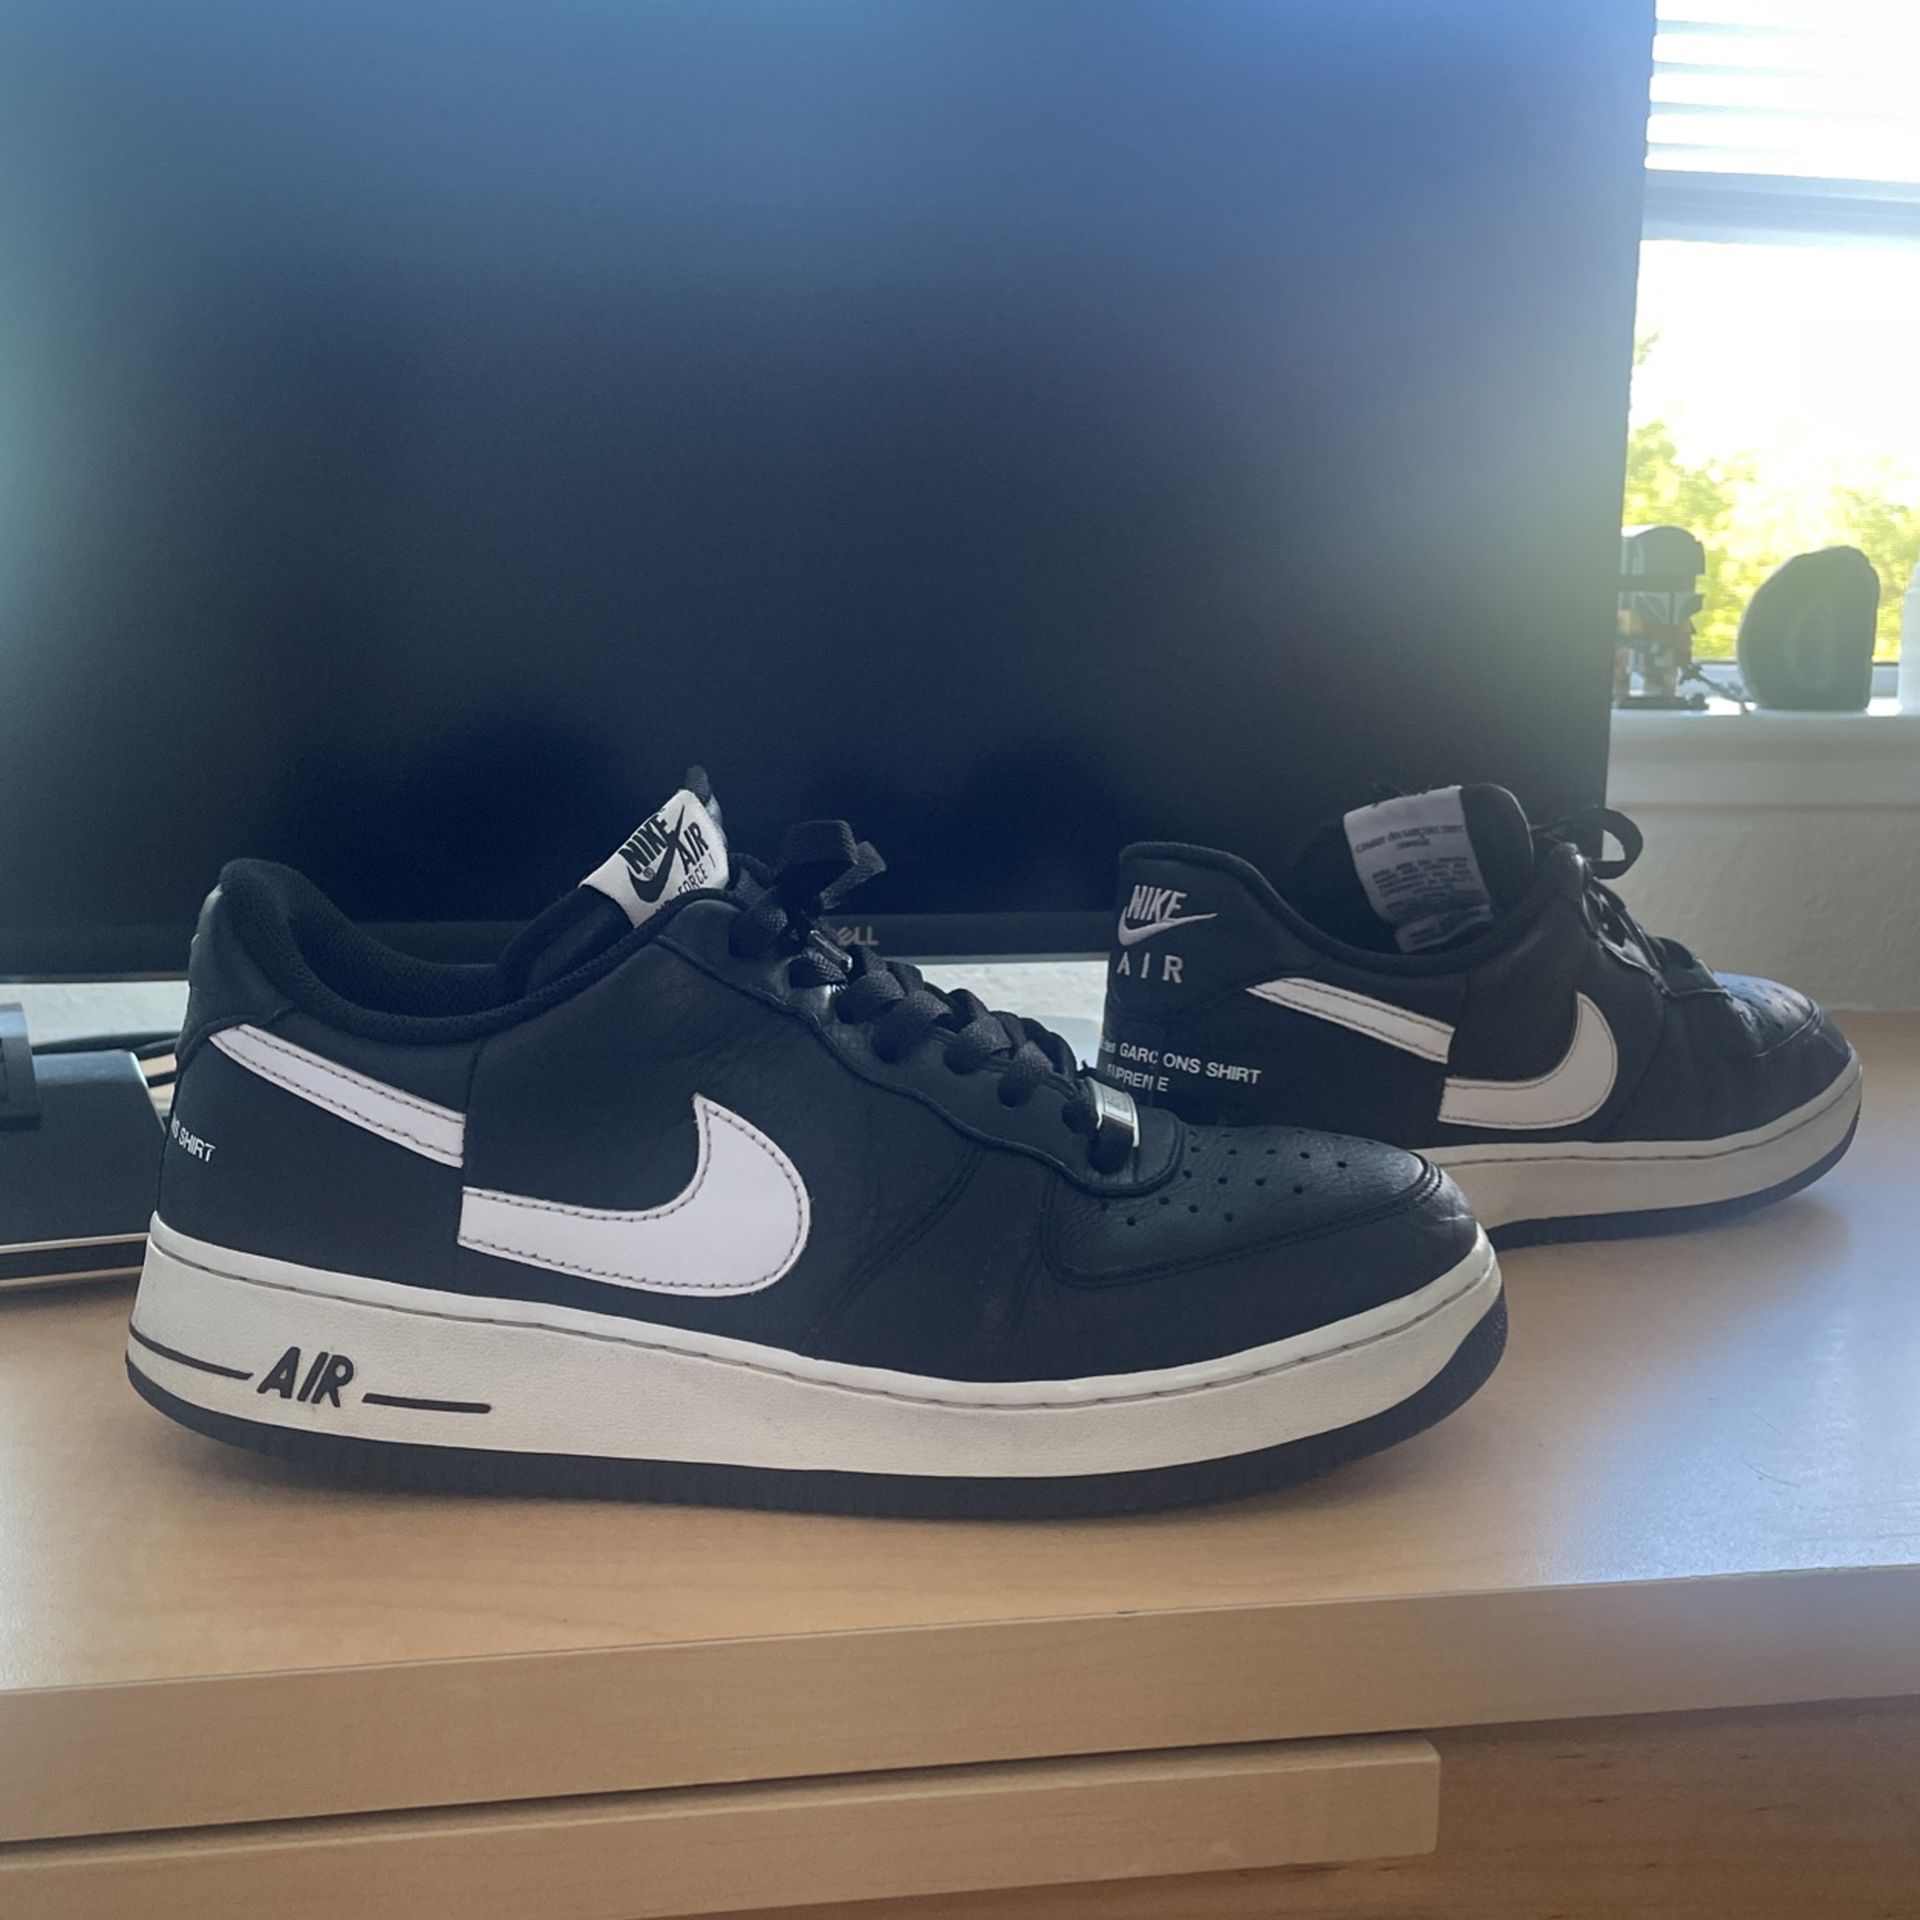 Air Force 1 Supreme/ CDG Size 10.5